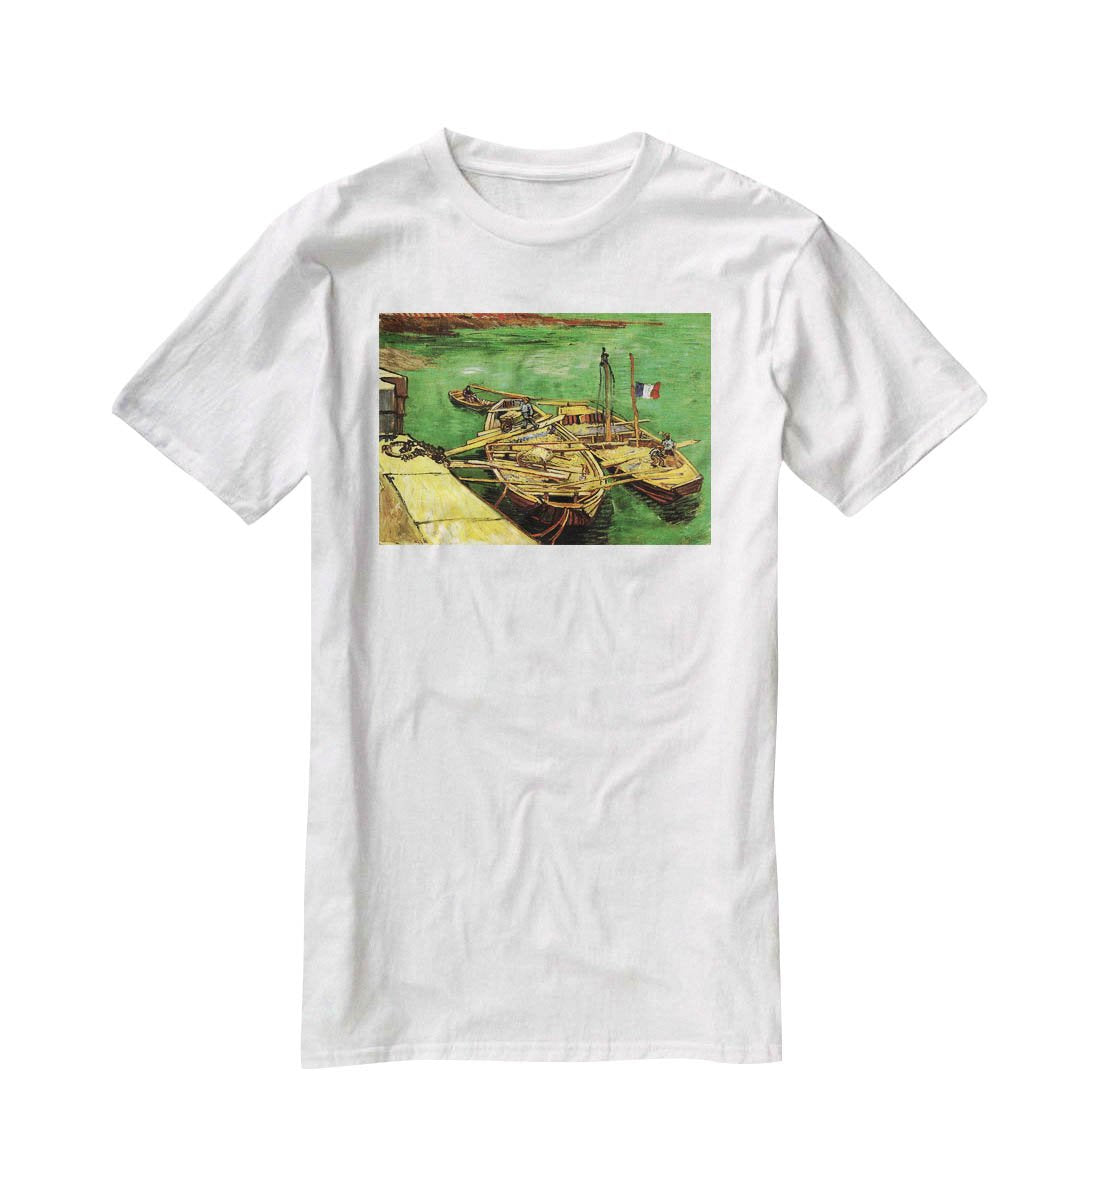 Quay with Men Unloading Sand Barges by Van Gogh T-Shirt - Canvas Art Rocks - 5